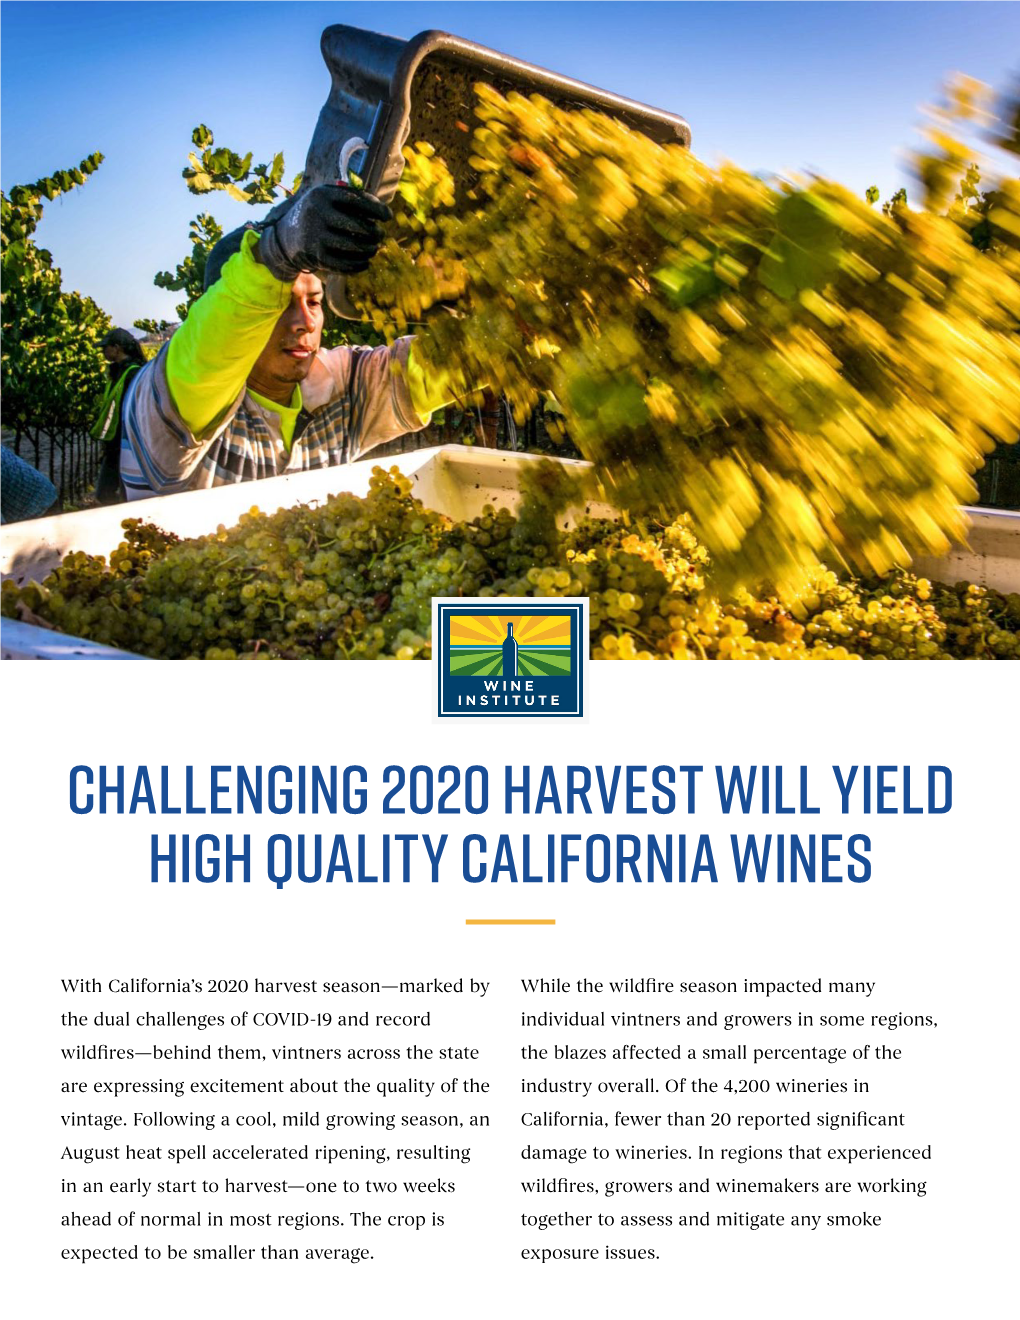 Challenging 2020 Harvest Will Yield High Quality California Wines